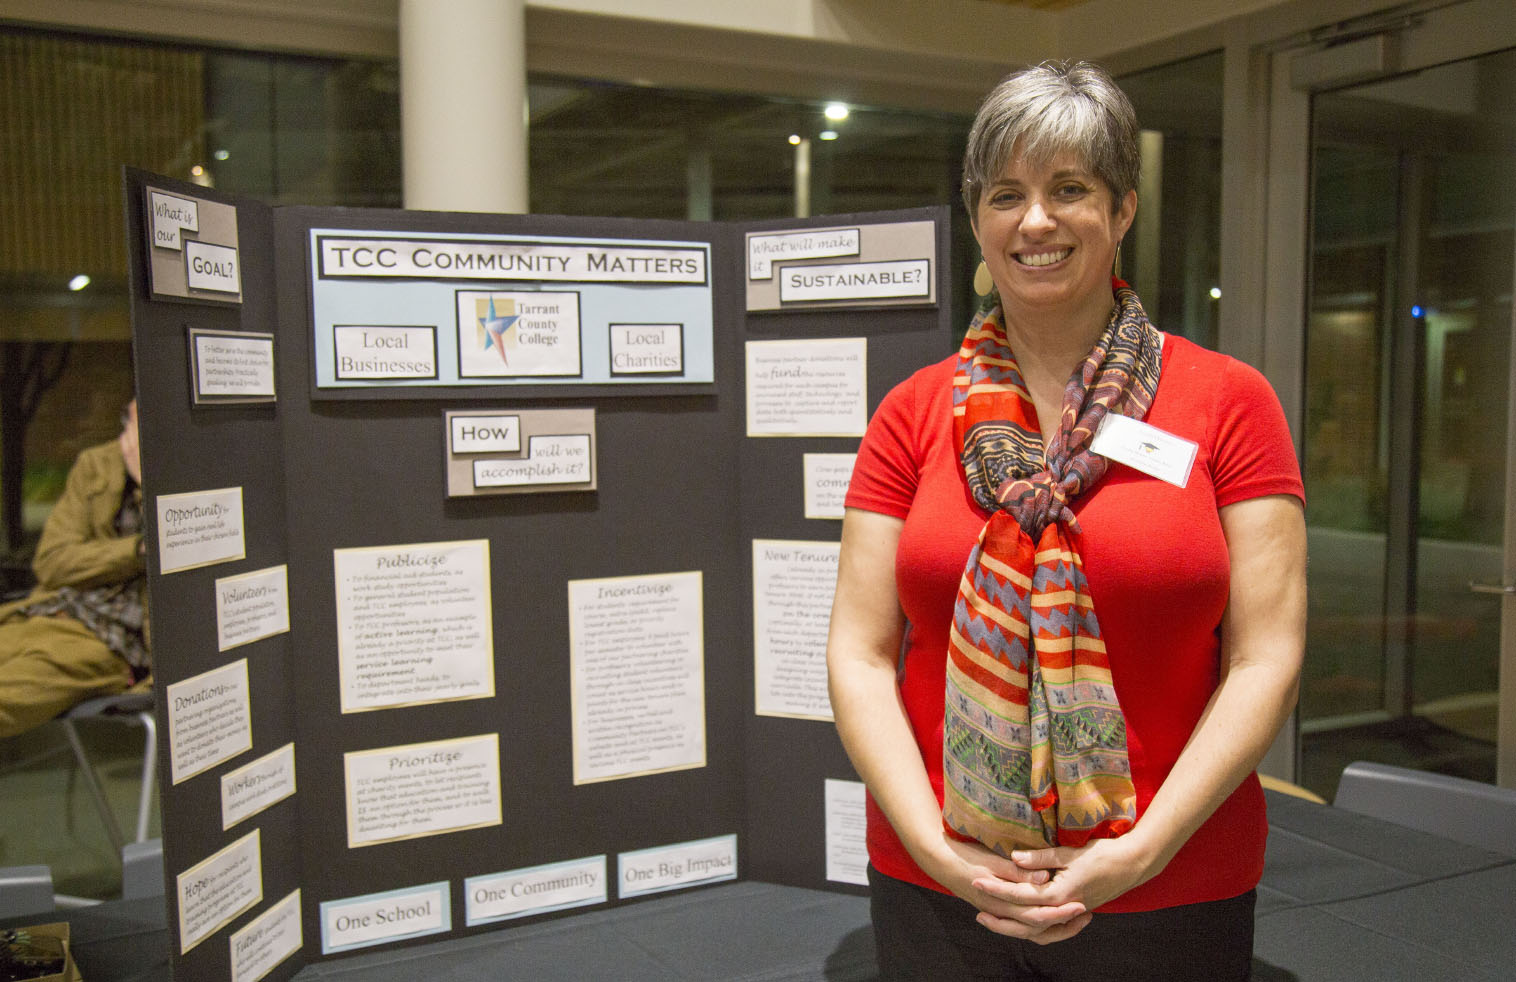 South student Jeana Owens presents her research project, which focuses on the impact of the TCC community. She did the project for the Cultivating Scholars Program and competed in the behavioral and social sciences division.